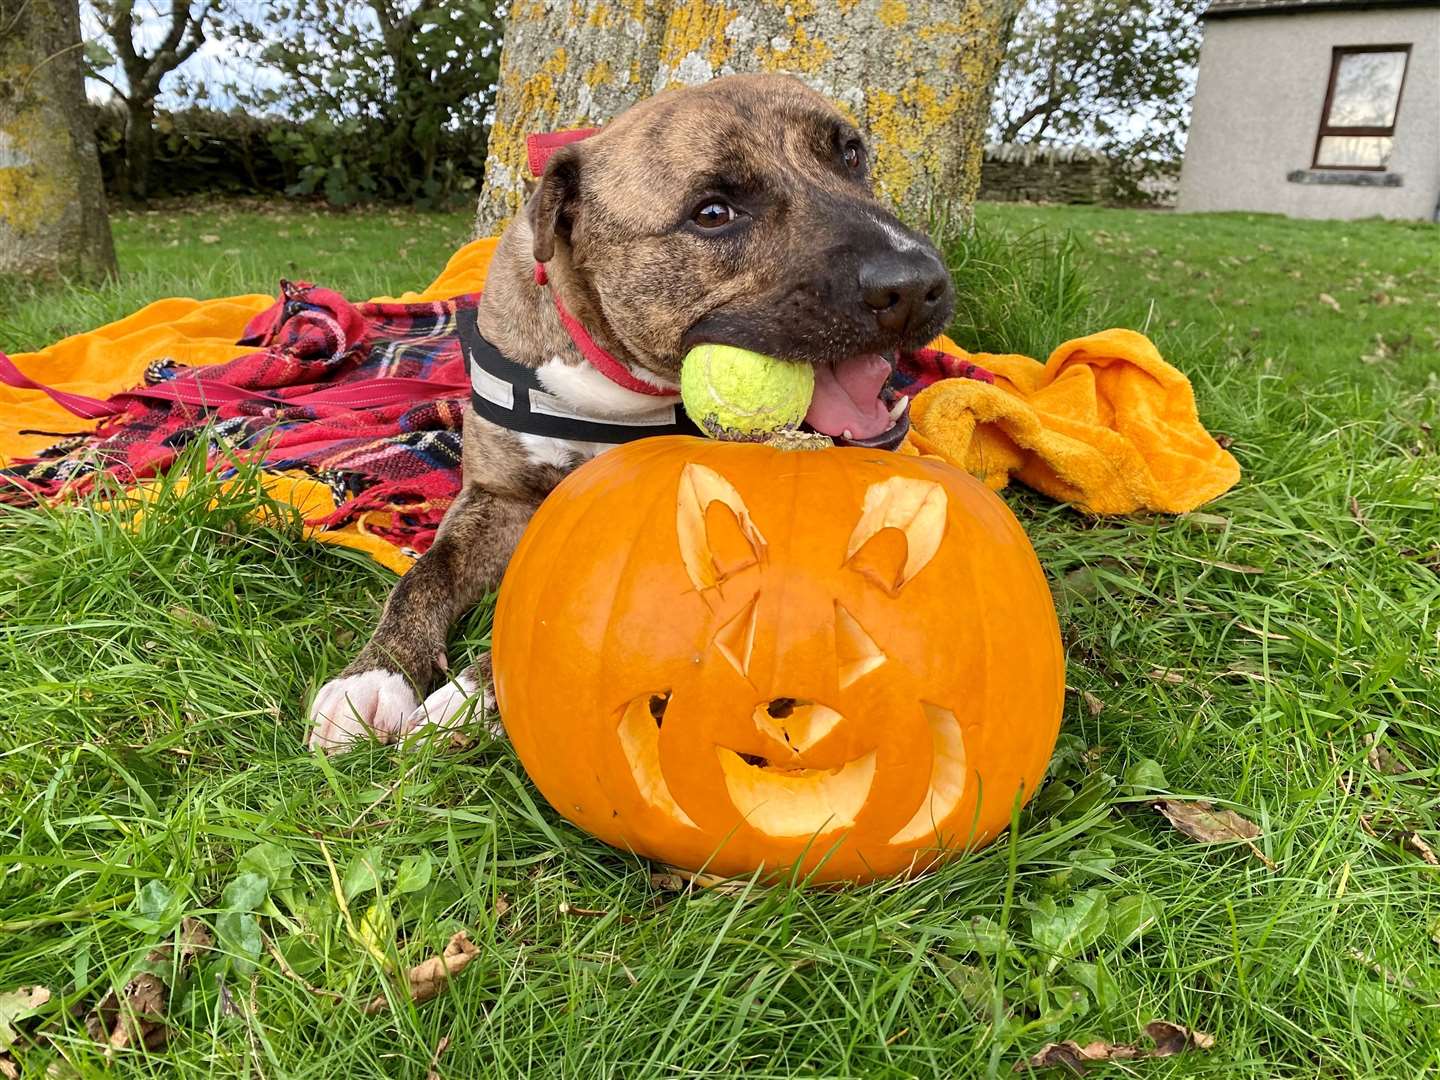 Buddy is looking for a spooktacular new home this Halloween.